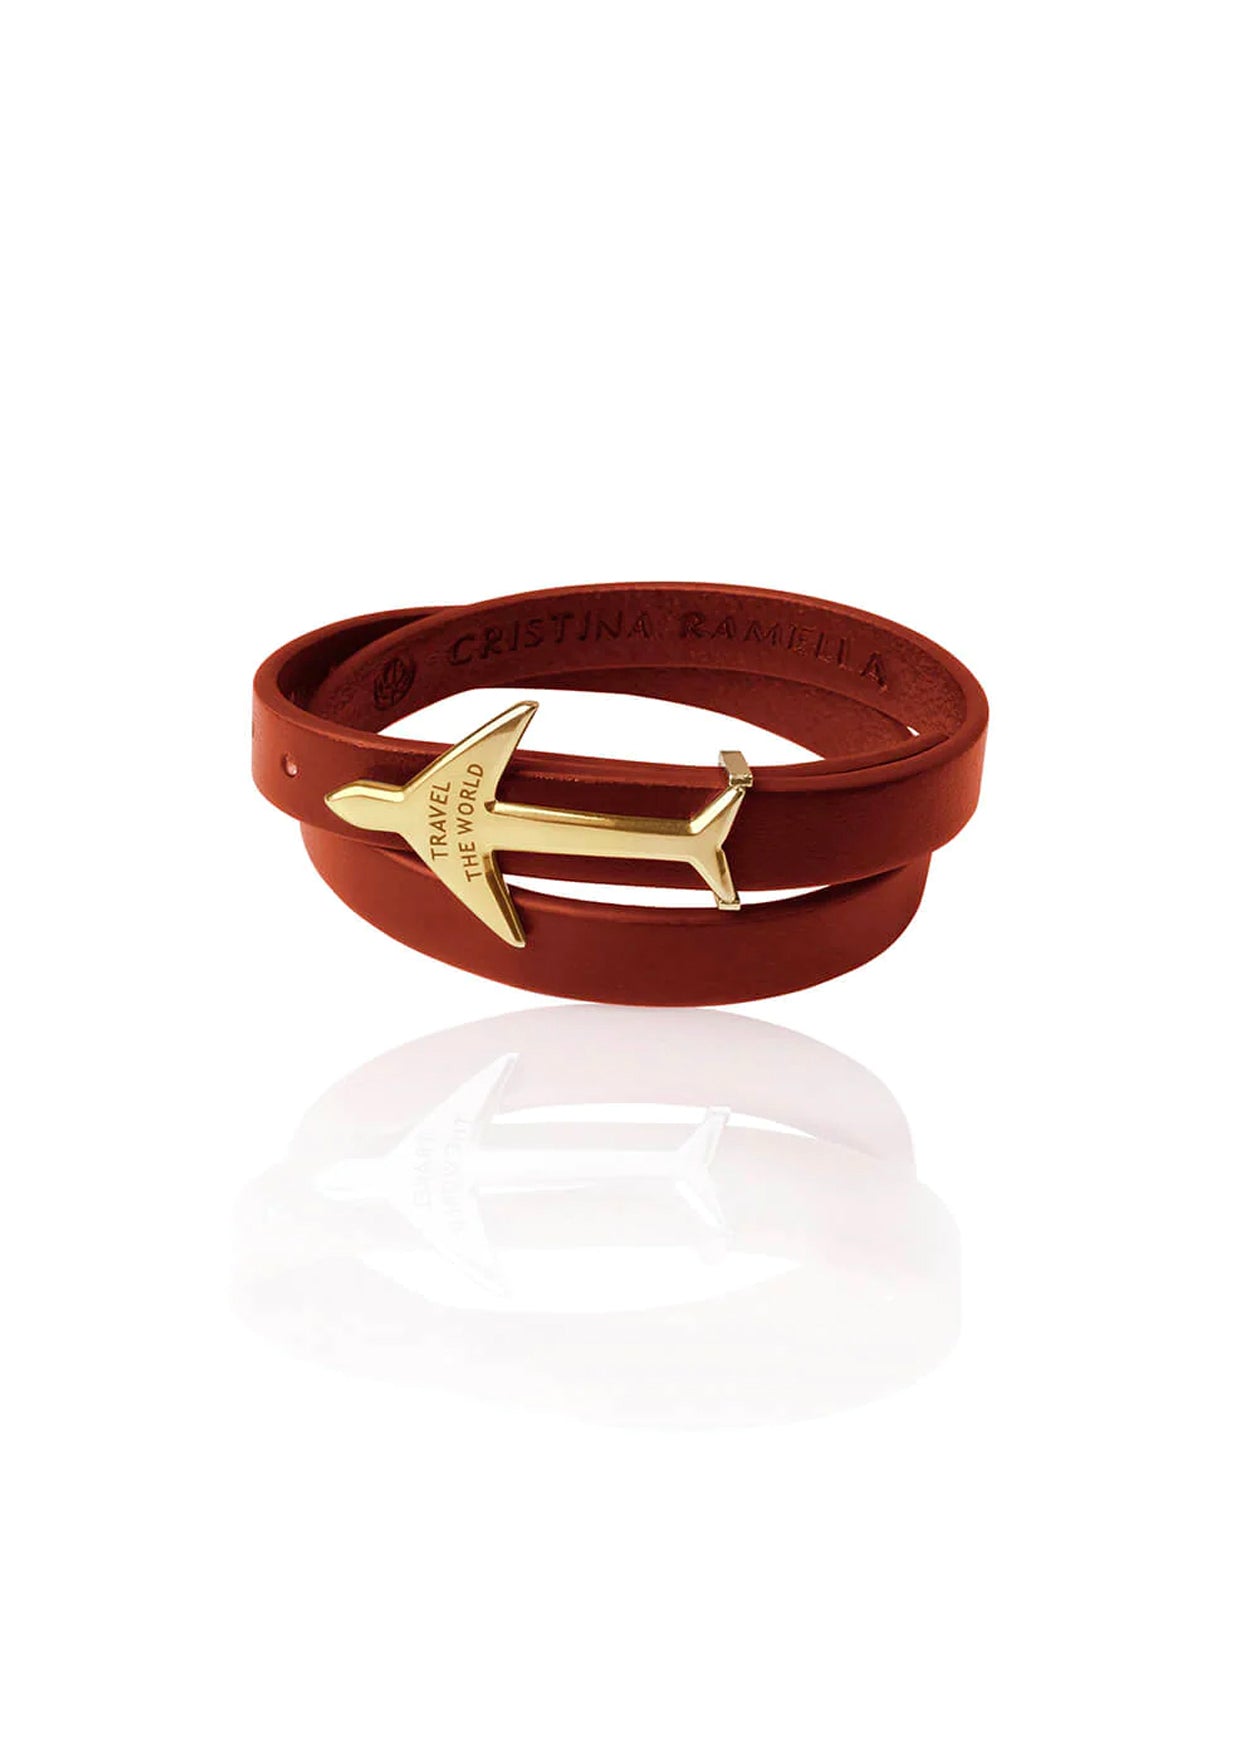 Xavier Delcour white leather bracelet with gold bondage ring - V A N II T A  S